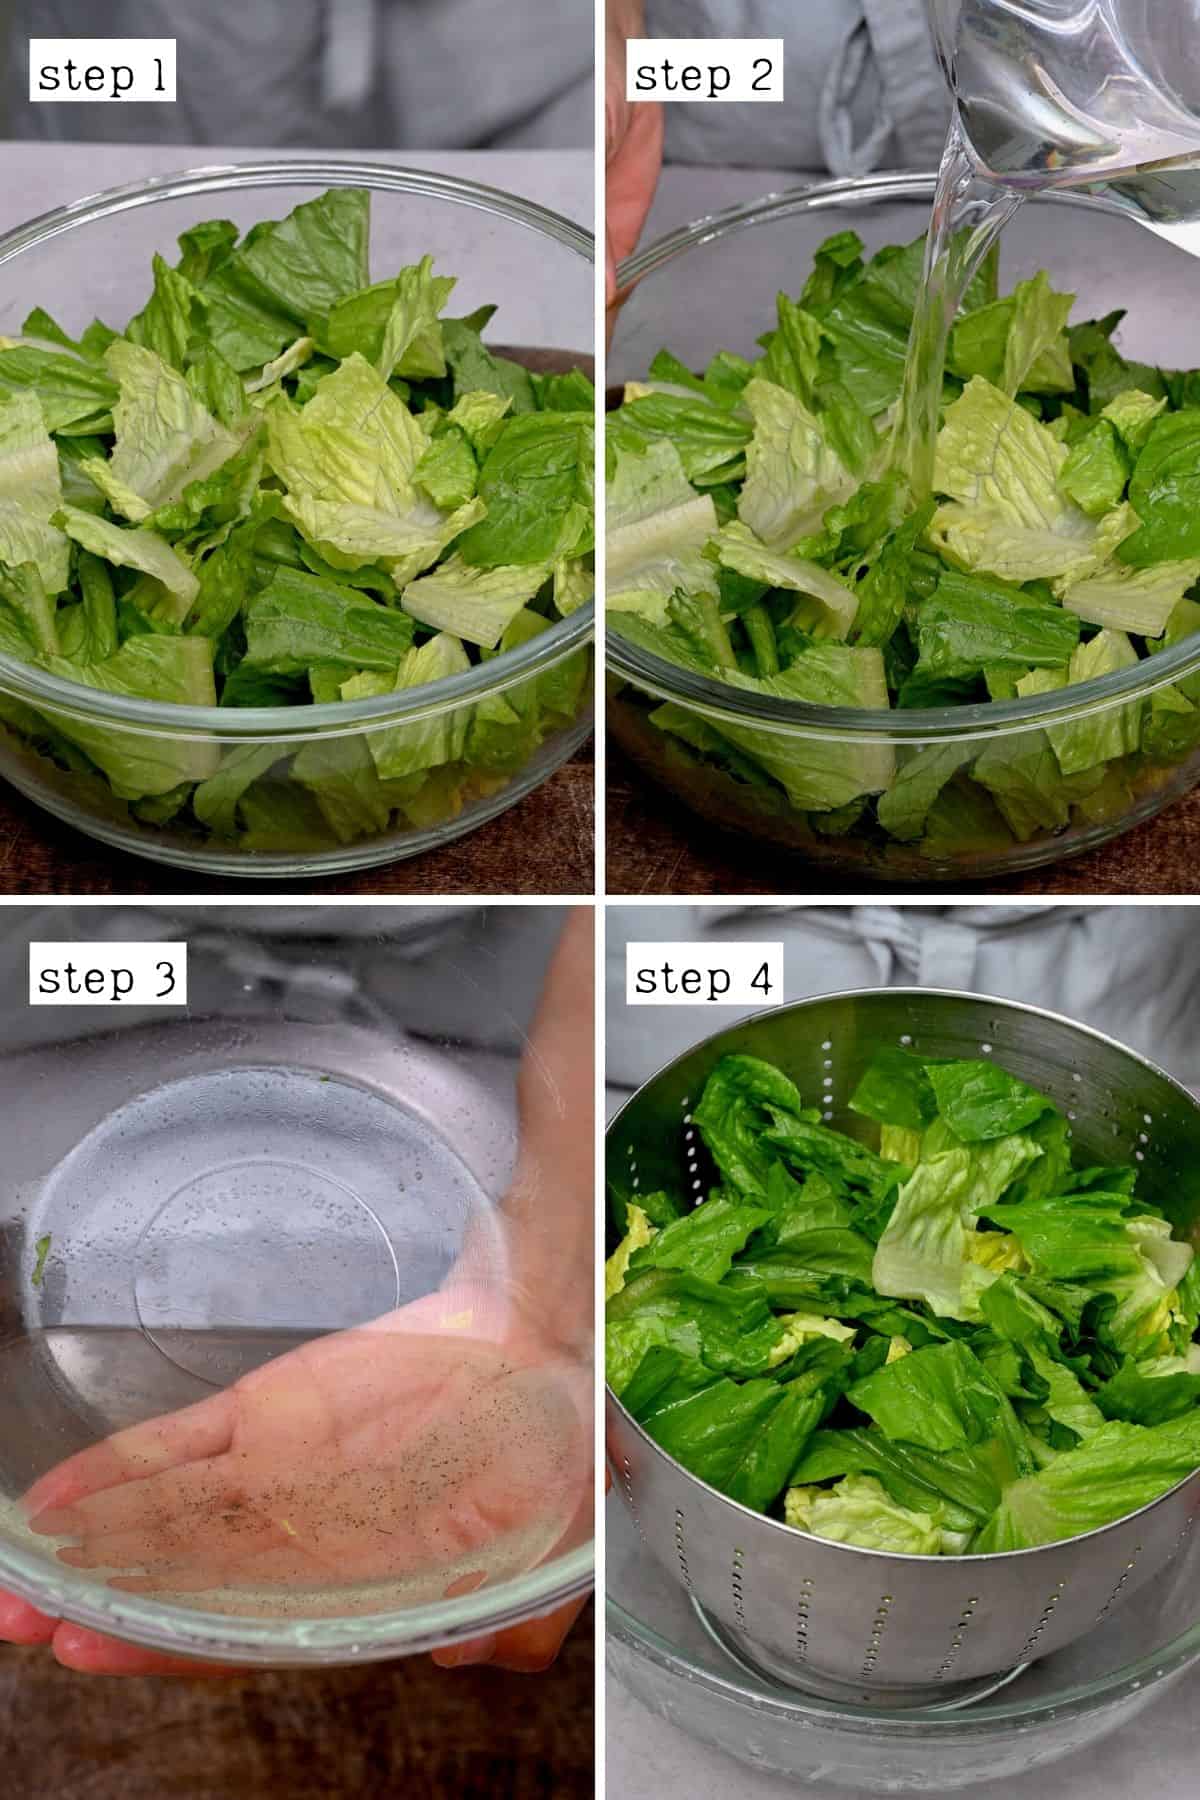 Steps for cleaning chopped lettuce